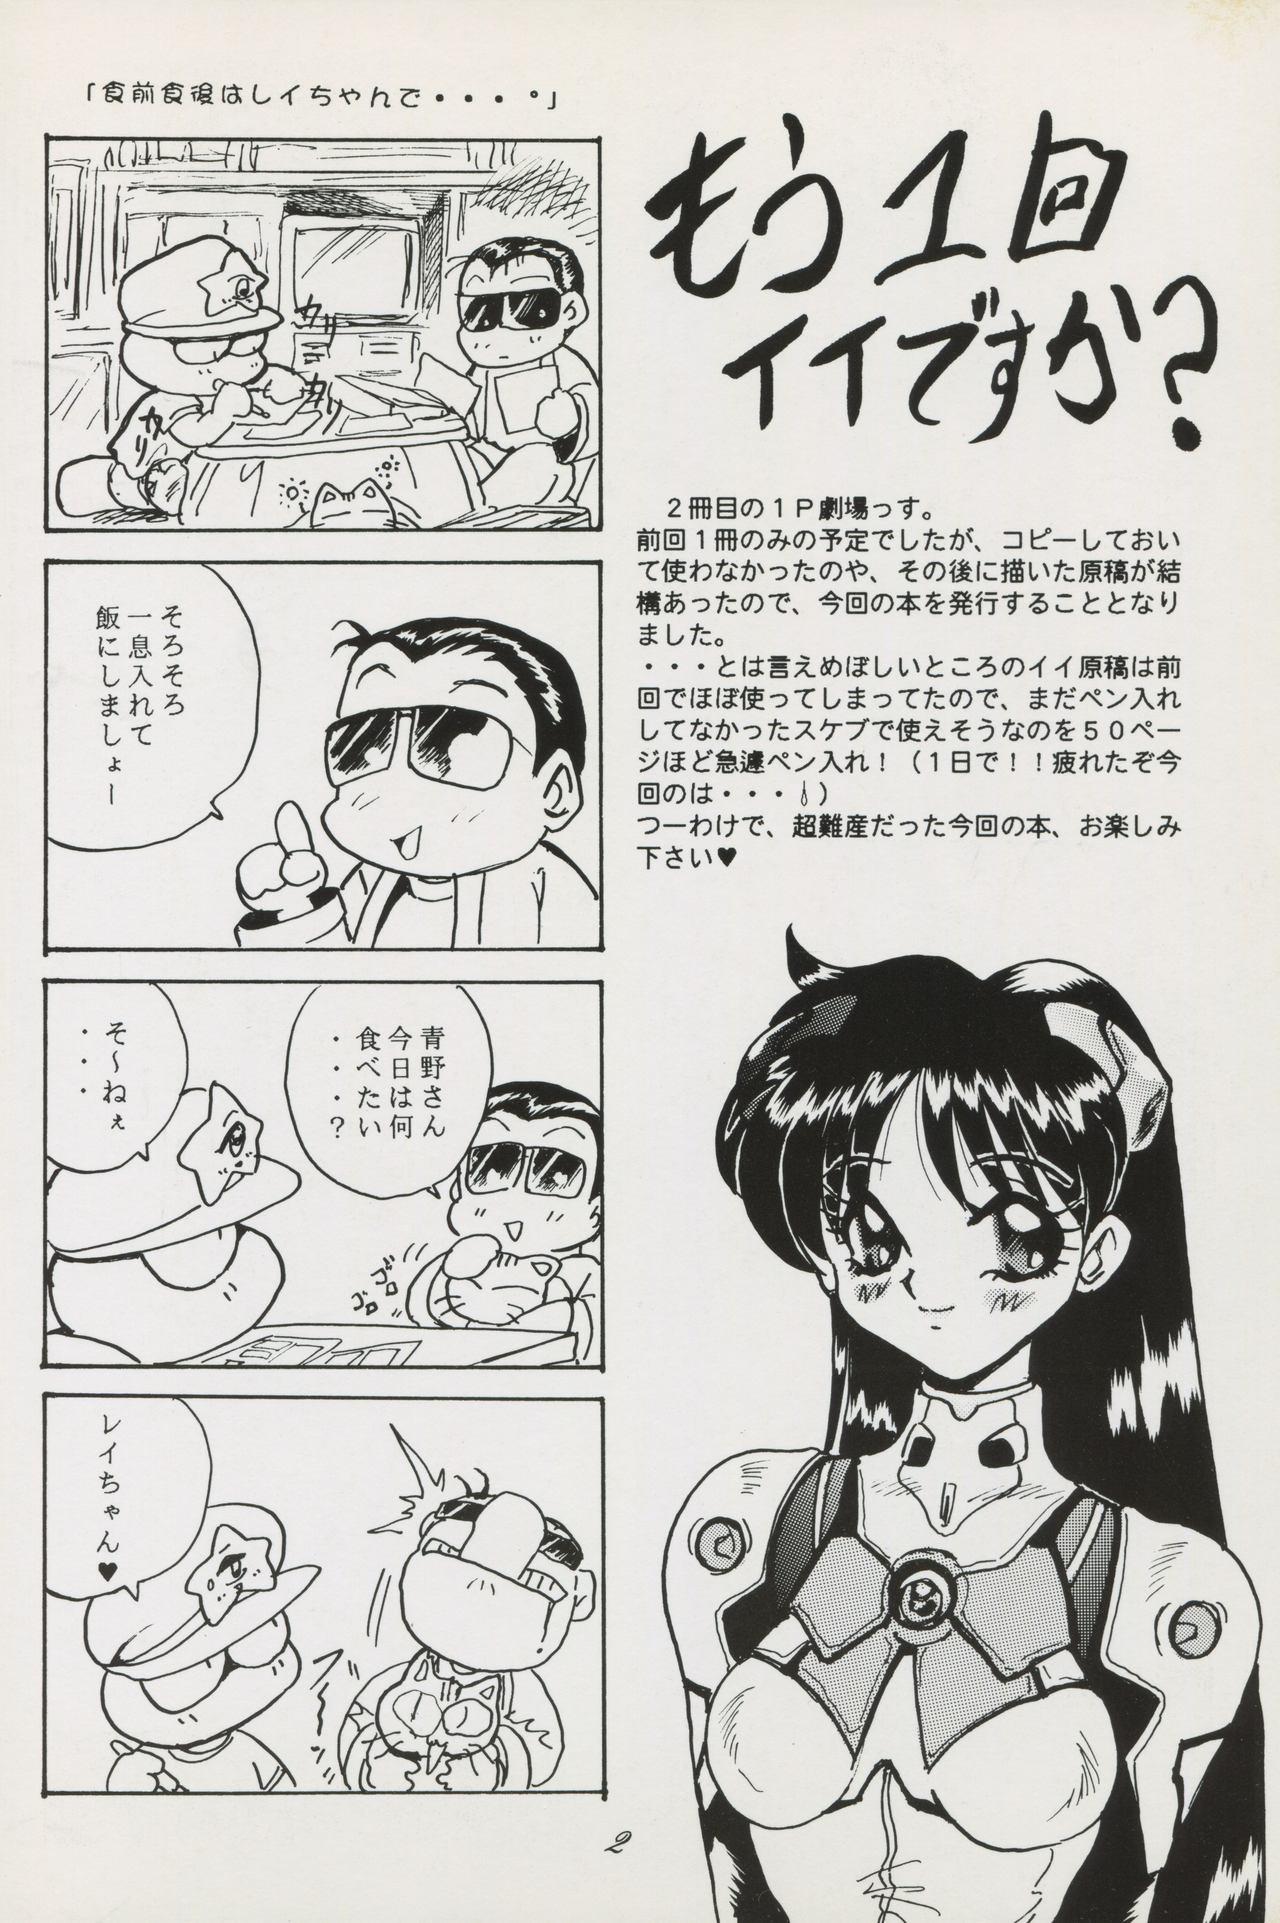 Little Sailor Moon 1 Page Gekijou P2 - SAILOR MOON ONE PAGE THEATER II - Sailor moon Gonzo - Page 2